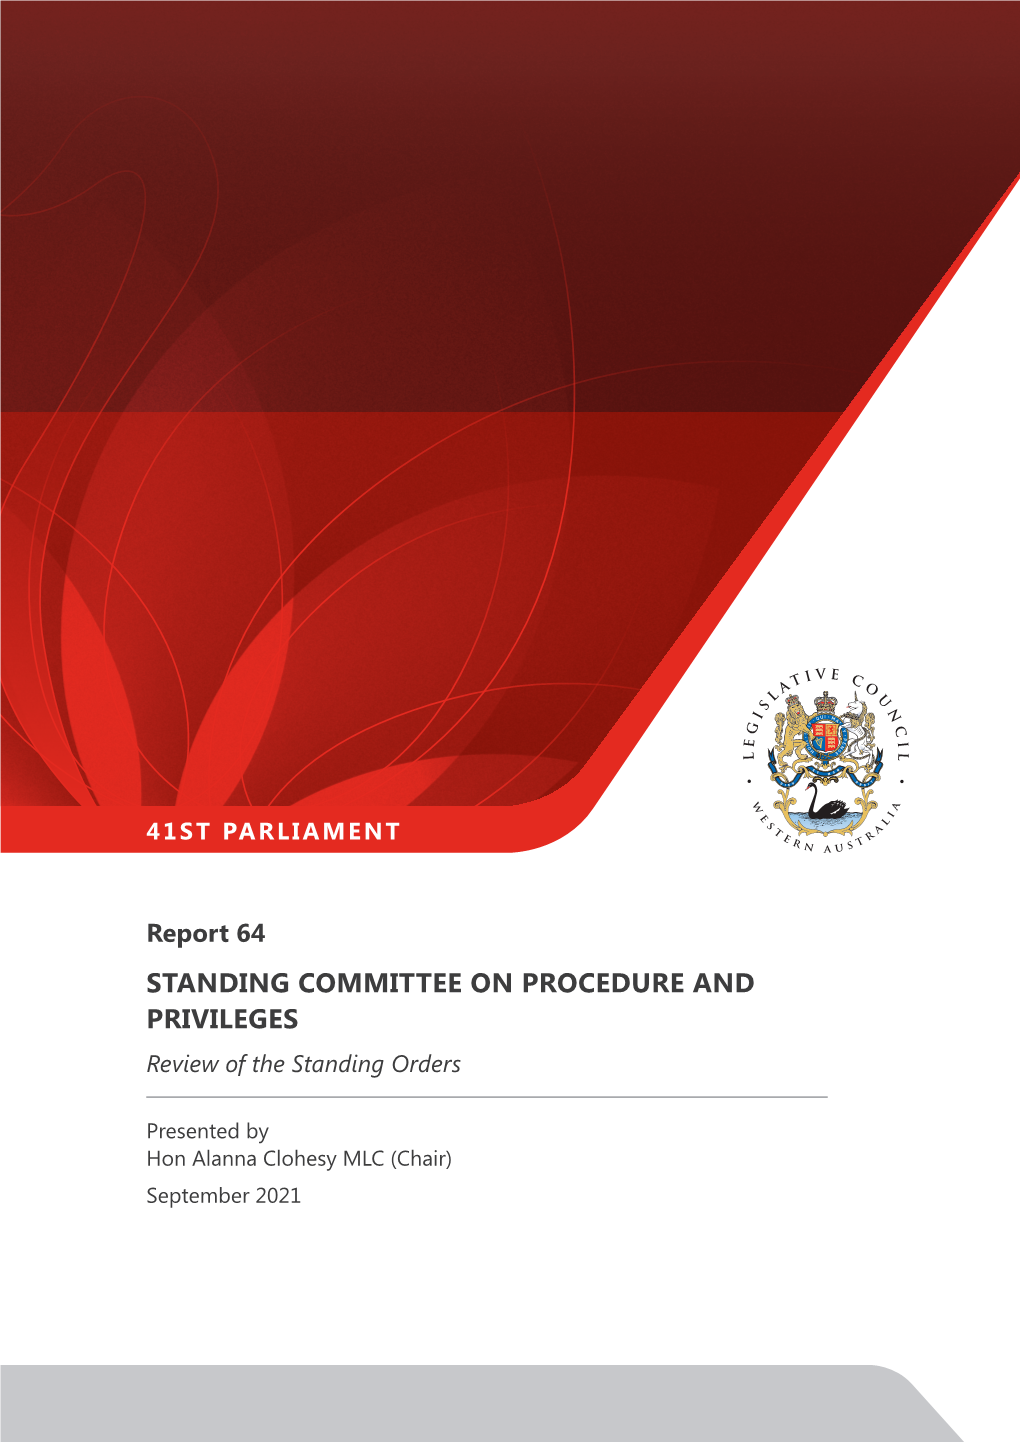 STANDING COMMITTEE on PROCEDURE and PRIVILEGES Review of the Standing Orders